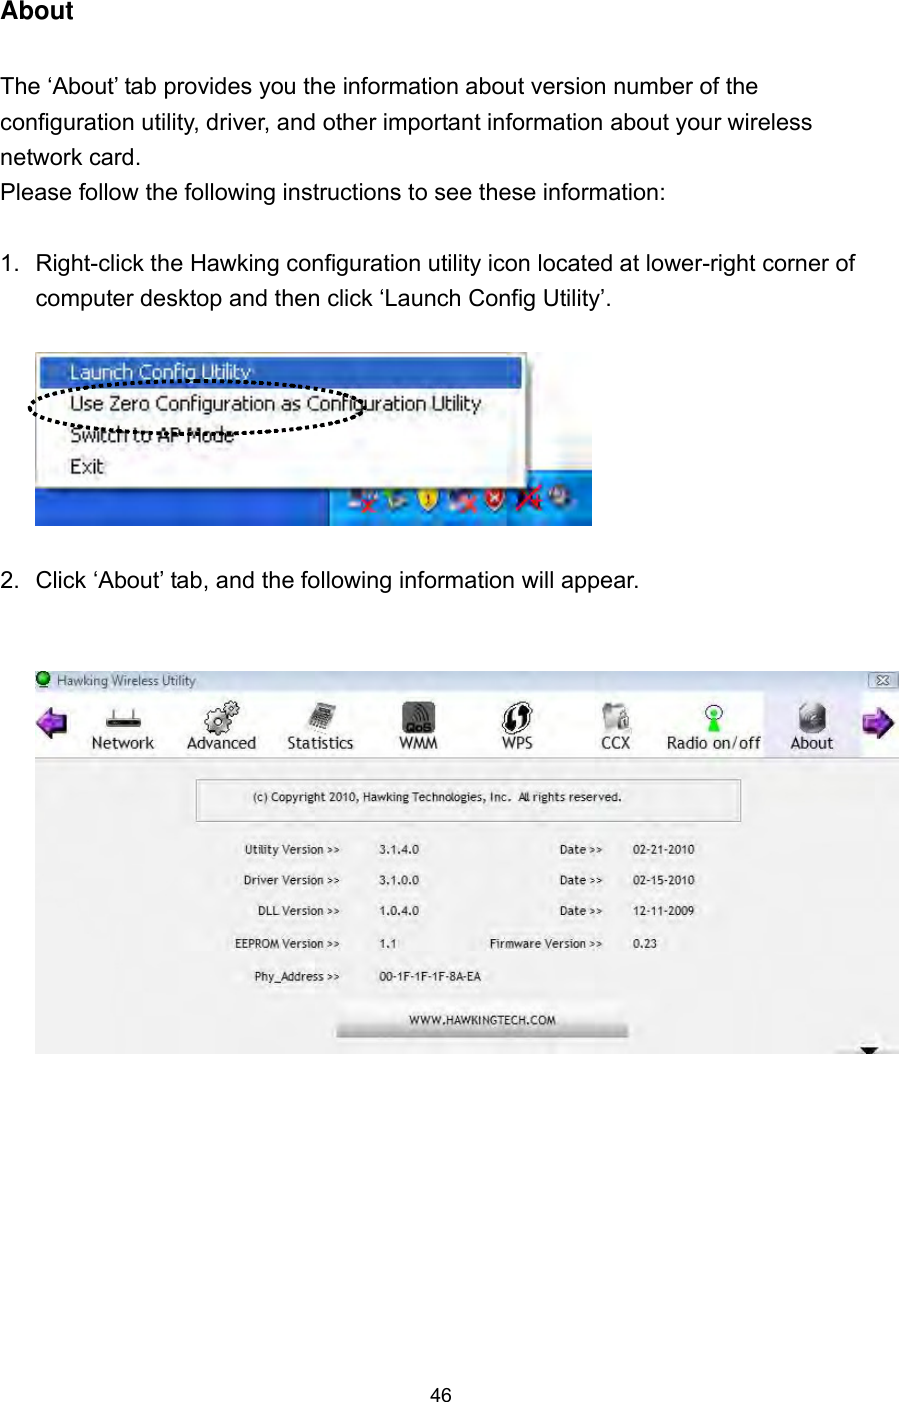  46 About  The ‘About’ tab provides you the information about version number of the configuration utility, driver, and other important information about your wireless network card. Please follow the following instructions to see these information:  1.  Right-click the Hawking configuration utility icon located at lower-right corner of computer desktop and then click ‘Launch Config Utility’.    2.  Click ‘About’ tab, and the following information will appear.    